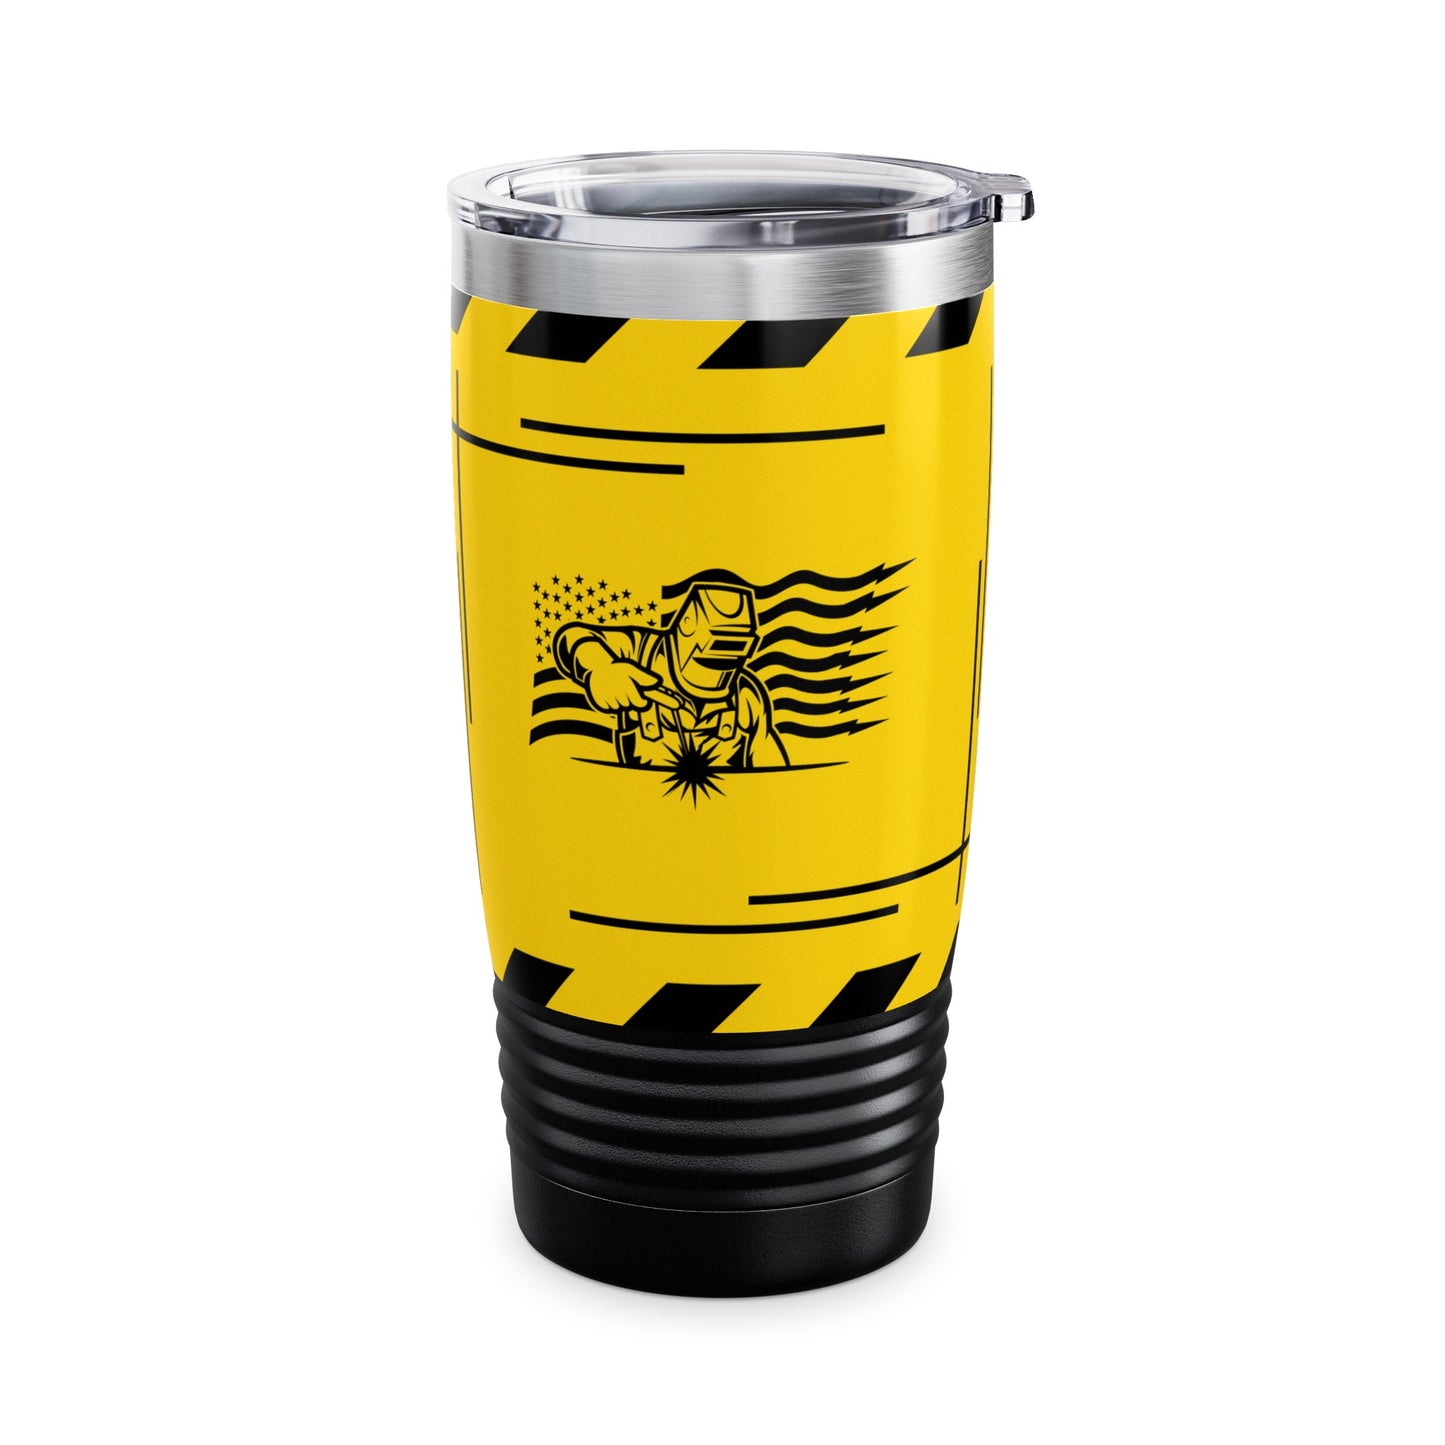 Relax, I'm A Certified Welder, And I Know Things - Ringneck Tumbler, 20oz